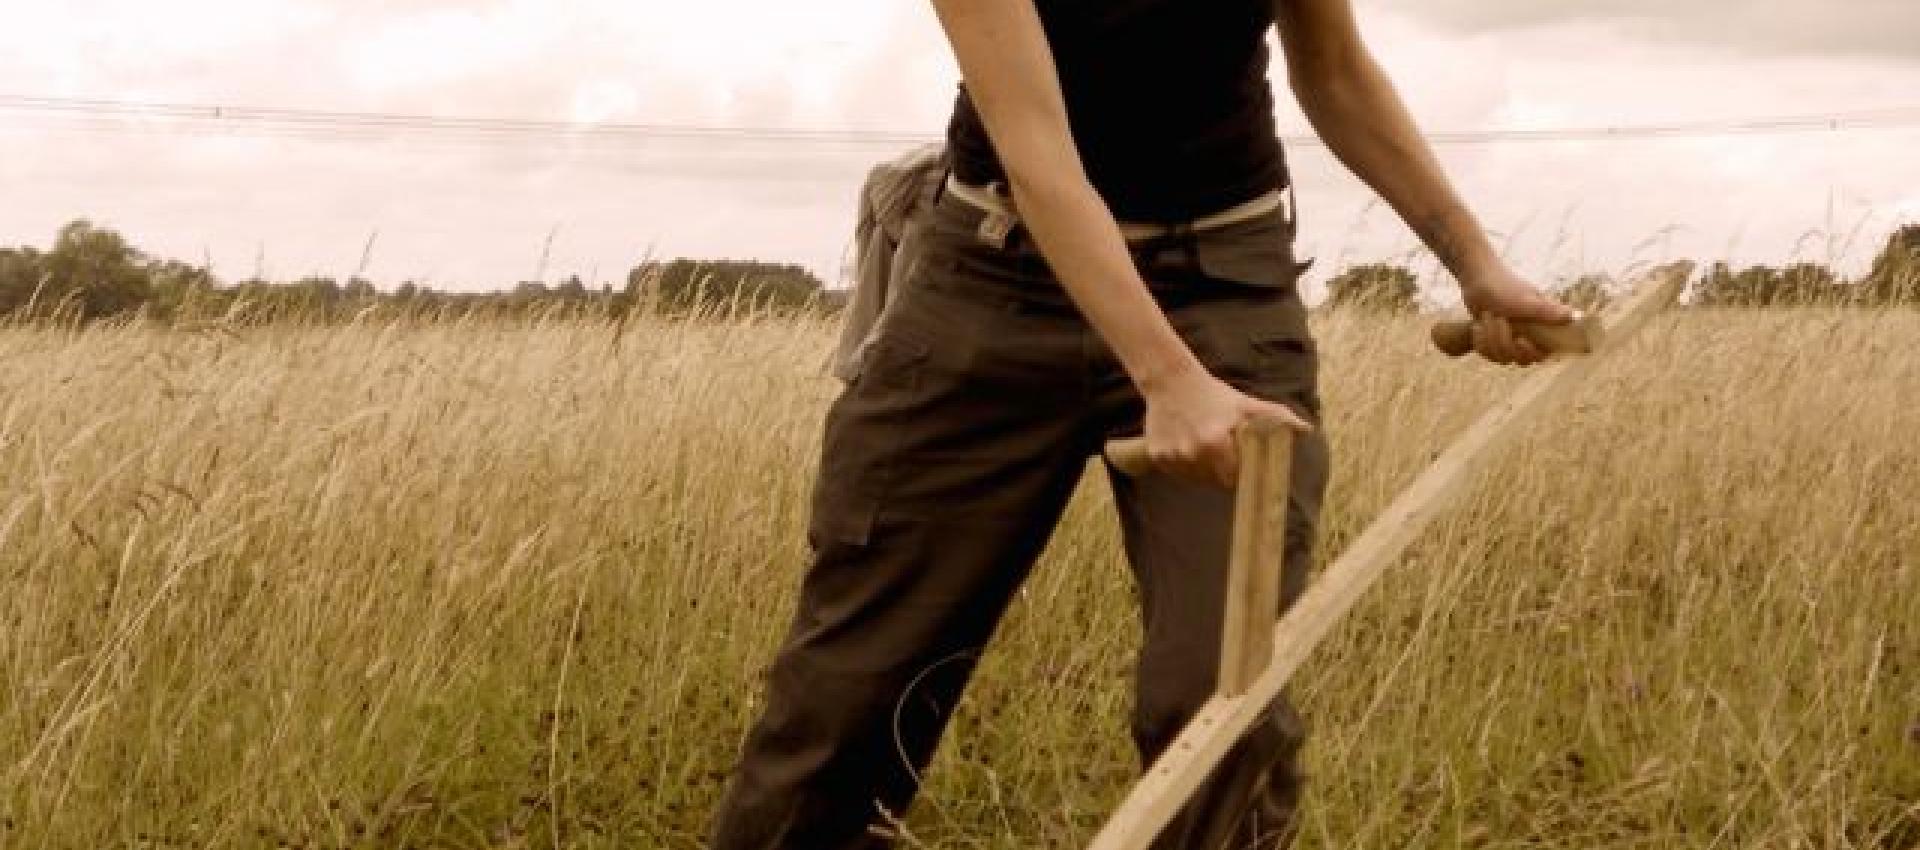 A person scything in a field 